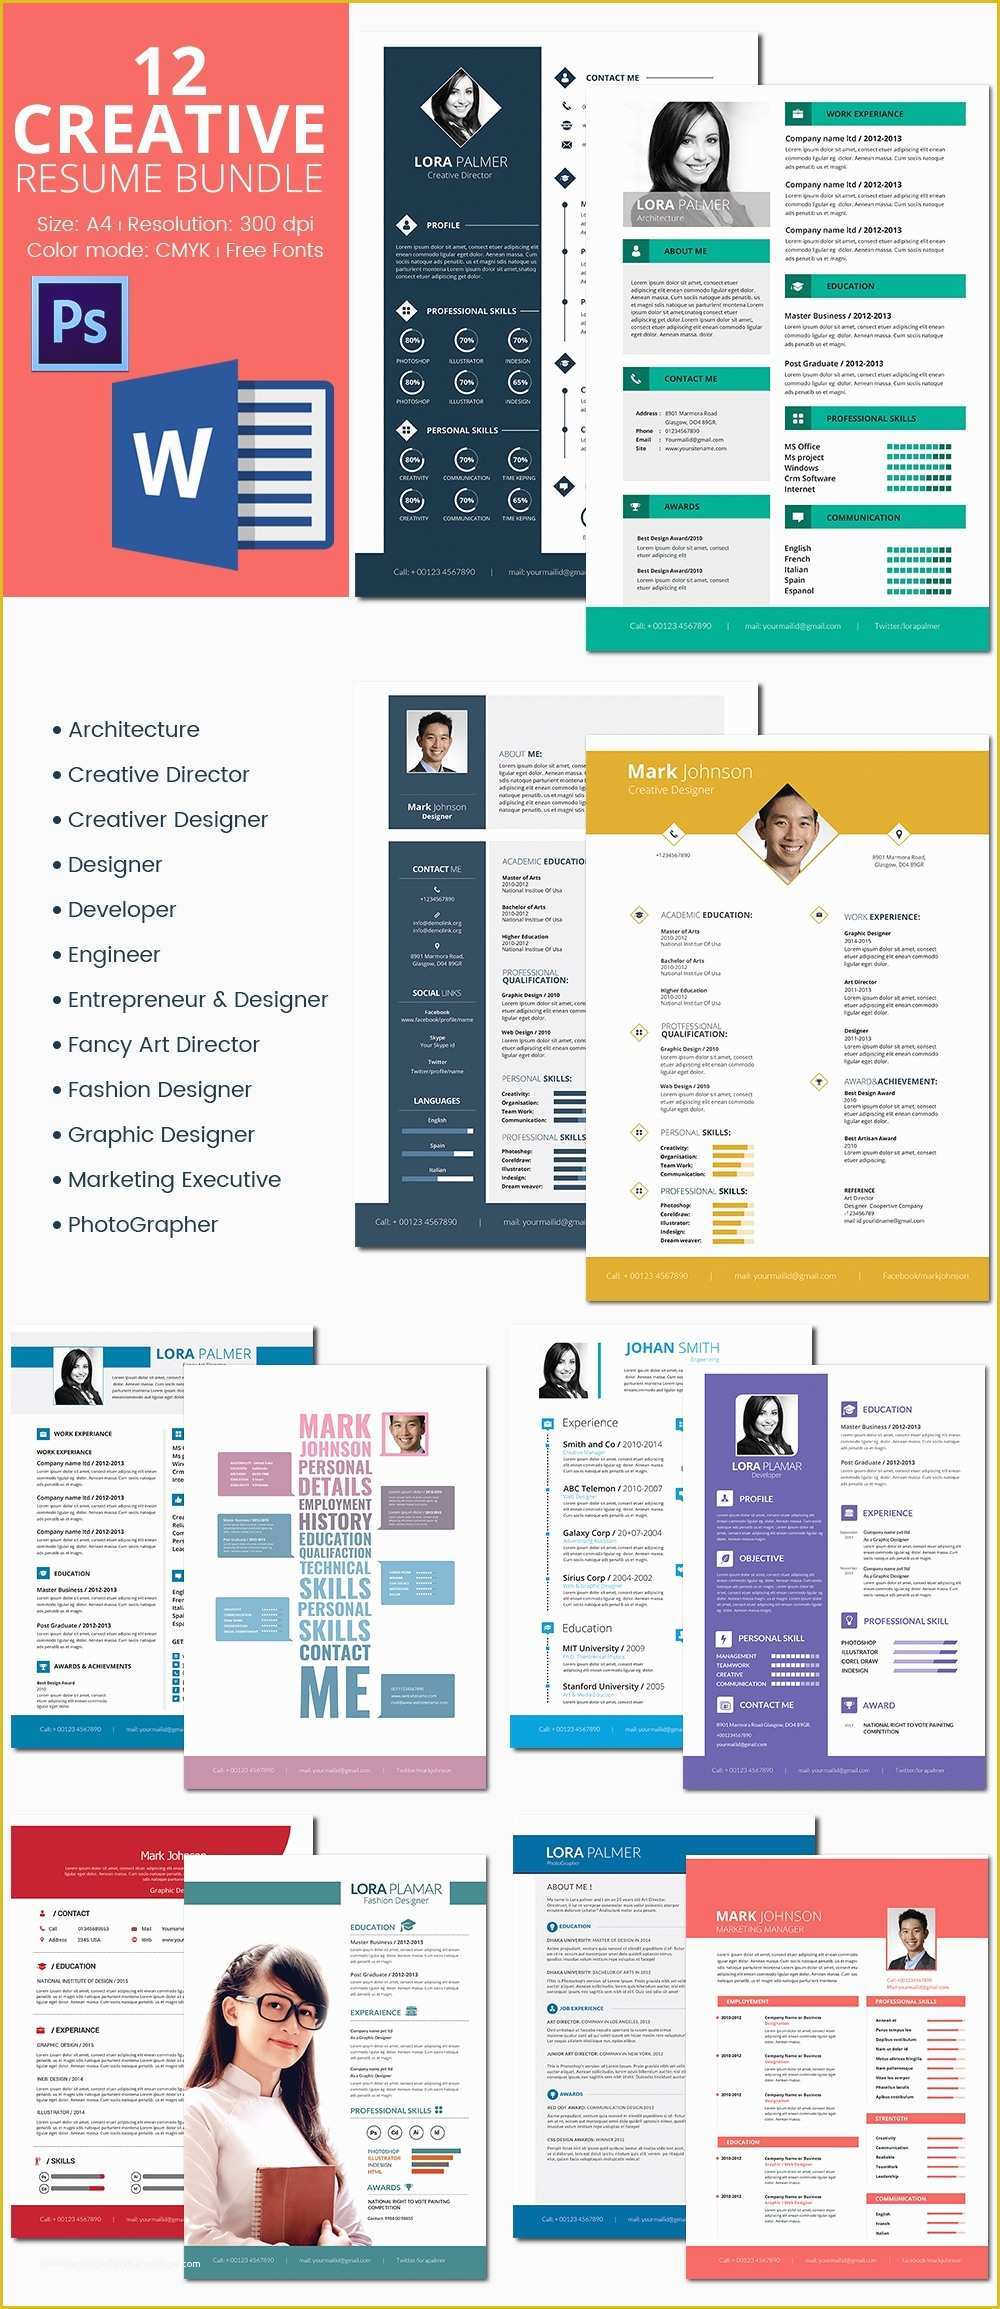 Free Resume Templates Download Pdf Of 41 E Page Resume Templates Free Samples Examples